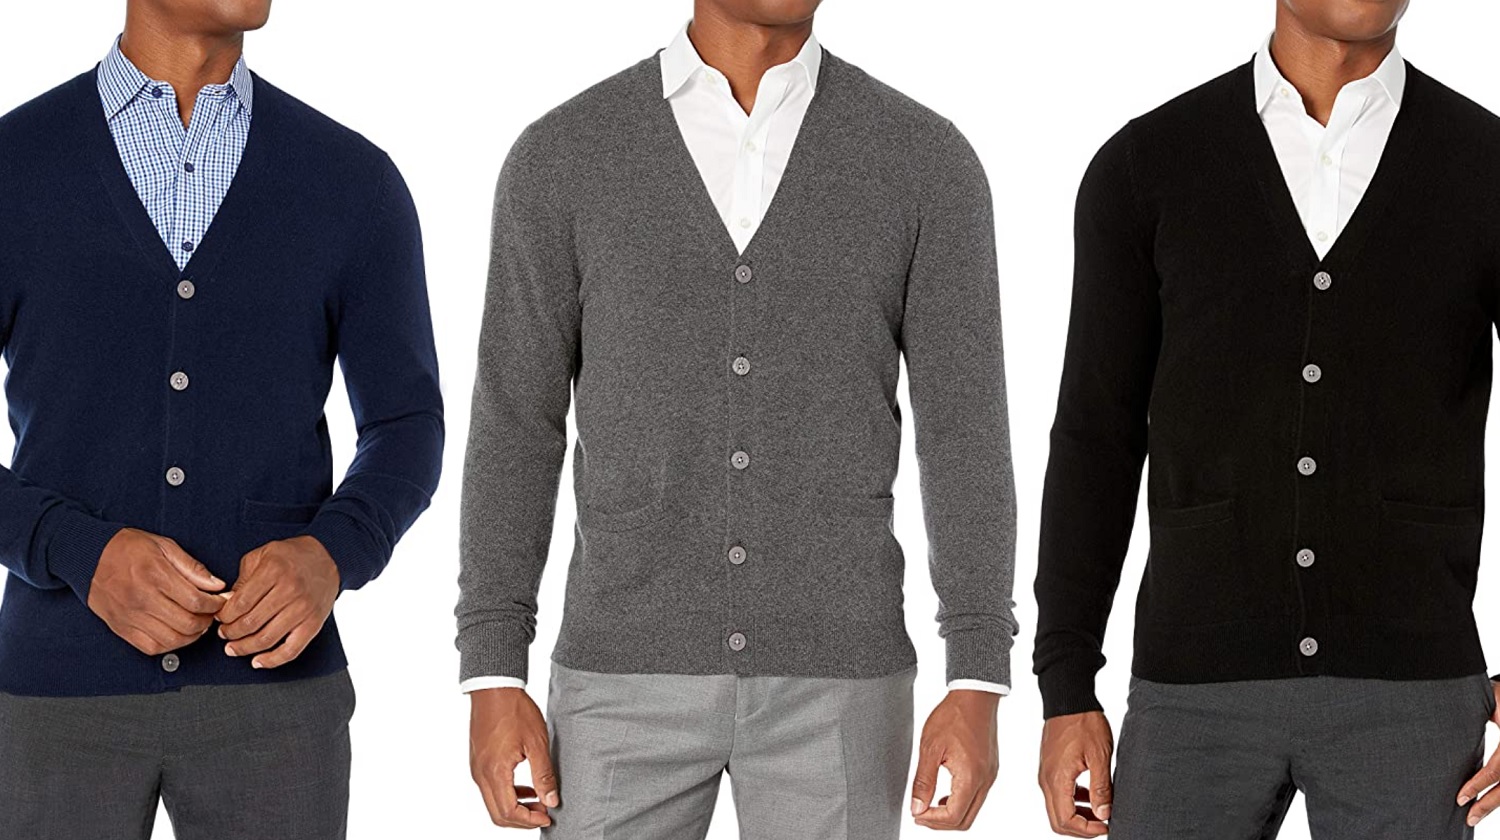 Steal Alert: 100% Cashmere Cardigans for $52 from Amazon’s Buttoned ...